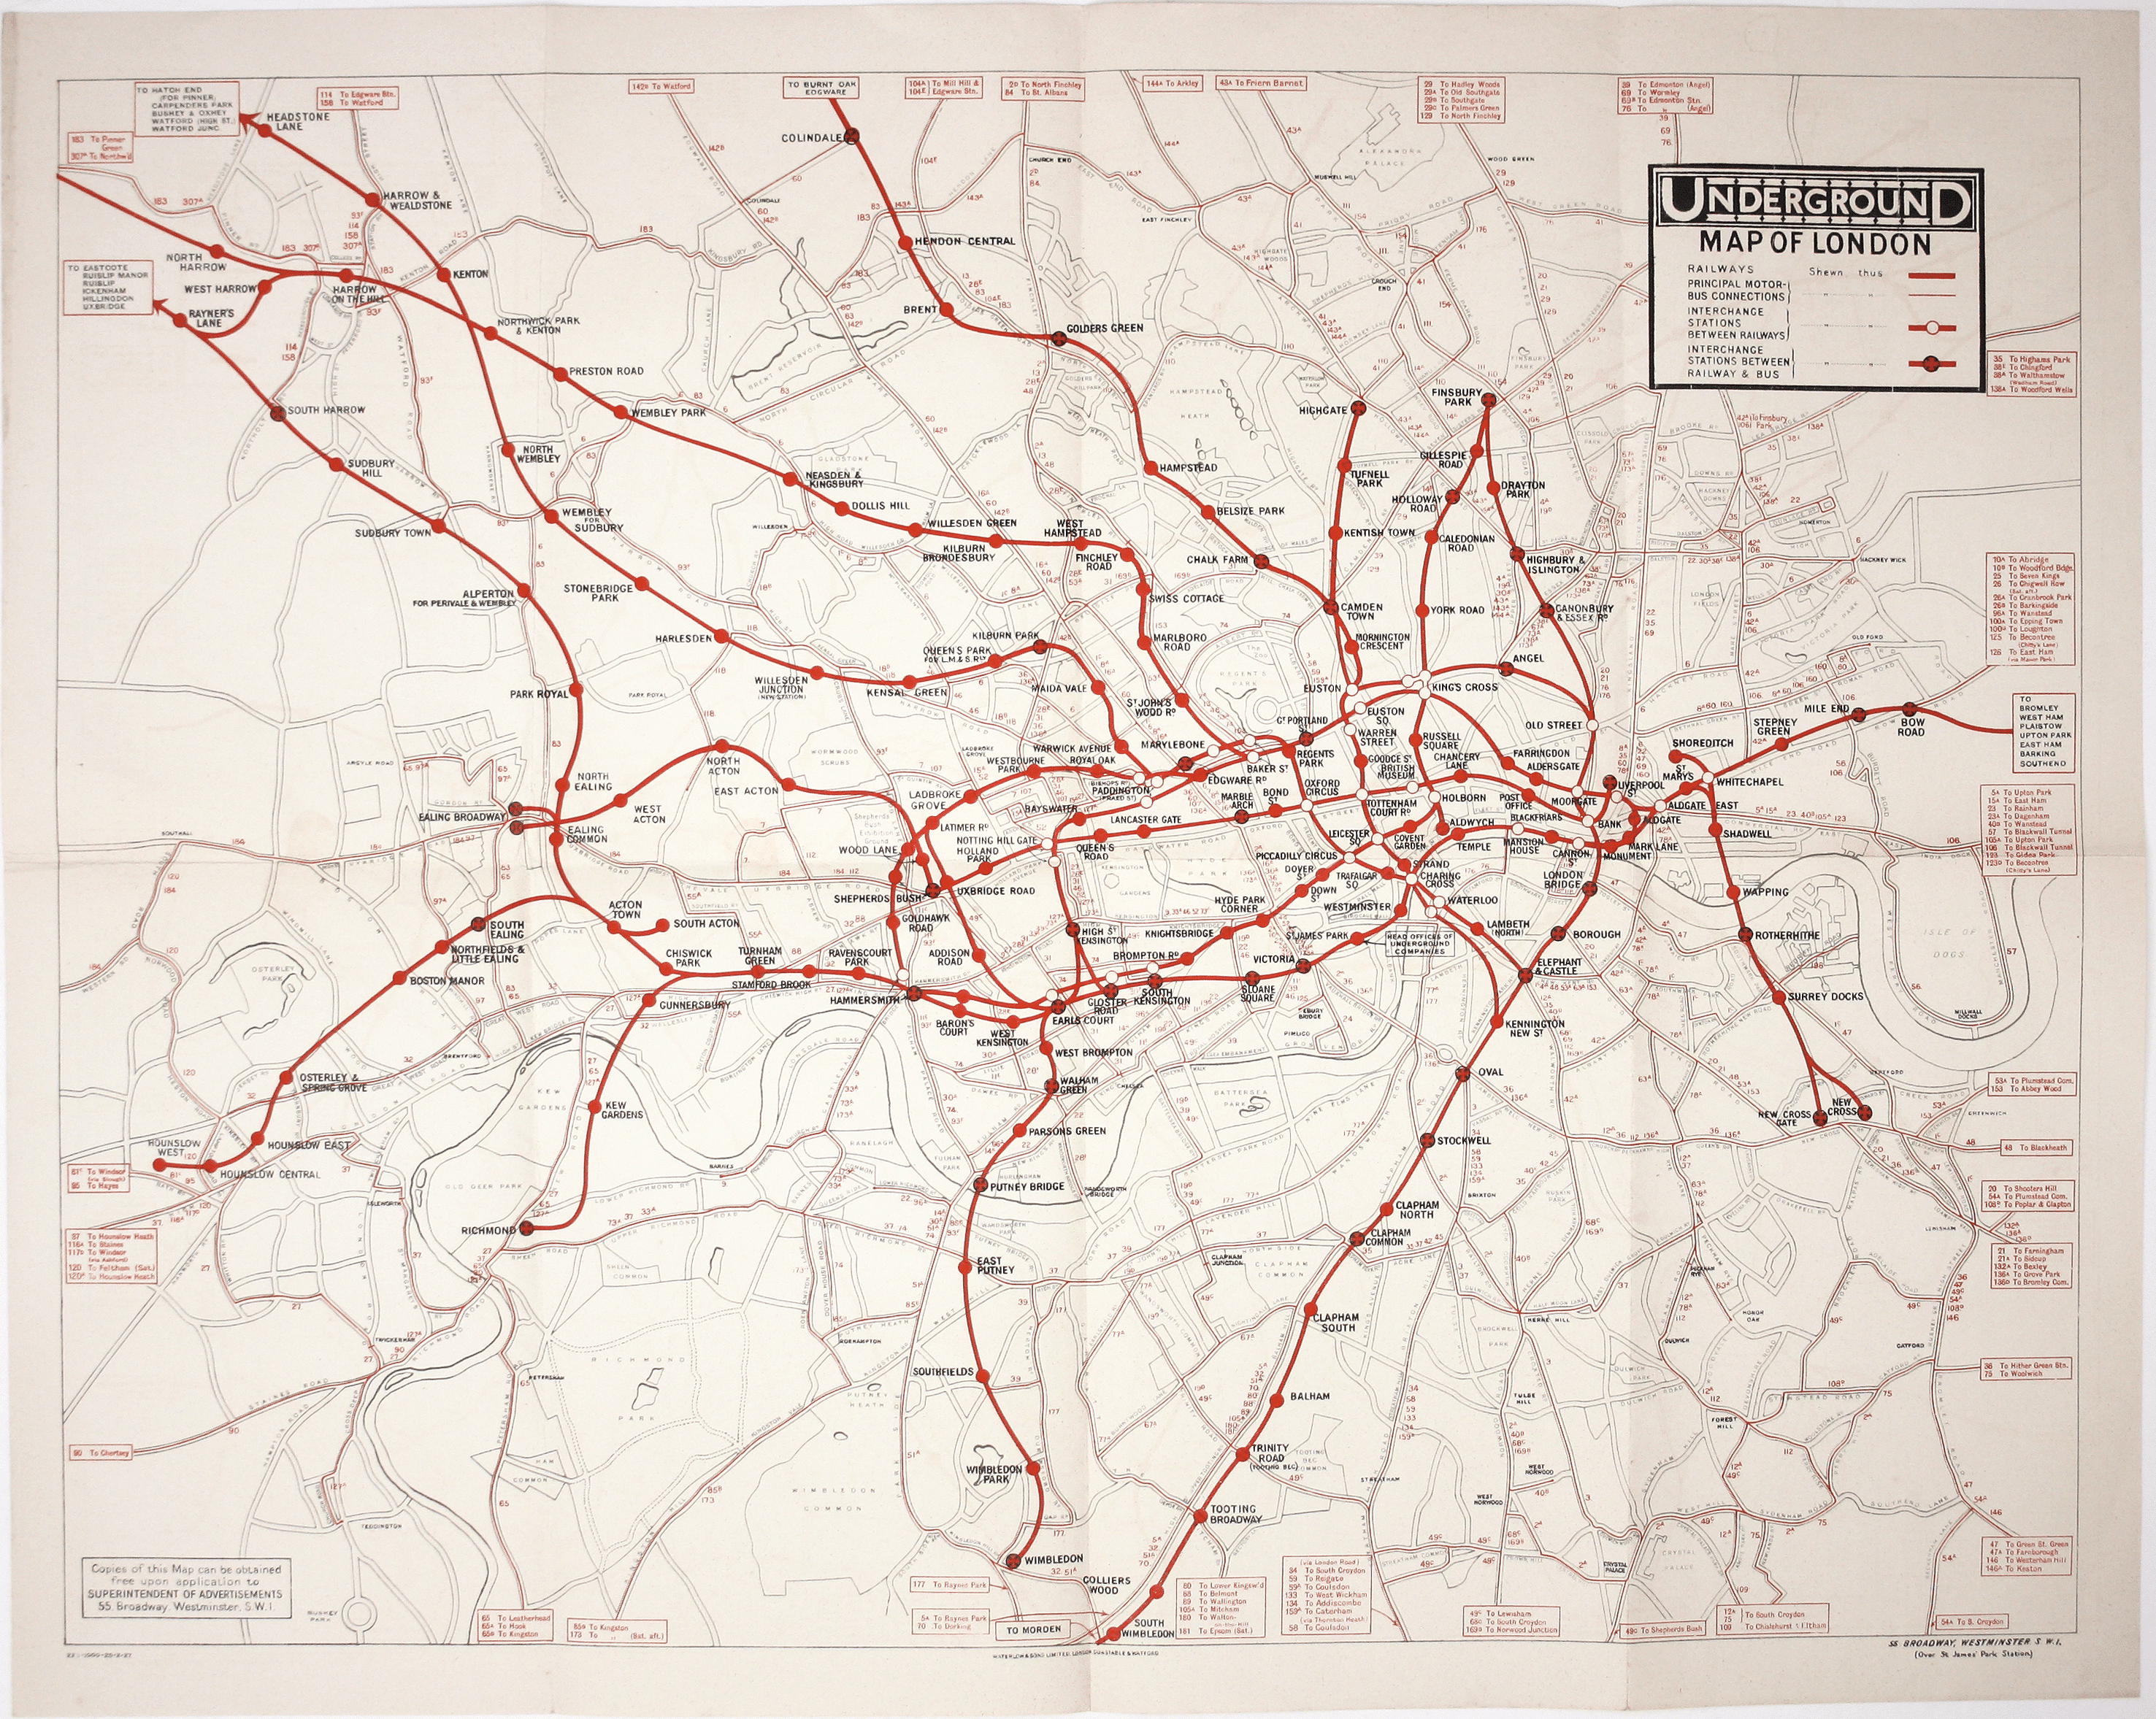 Underground Group’s 1927 Double Crown Station Map